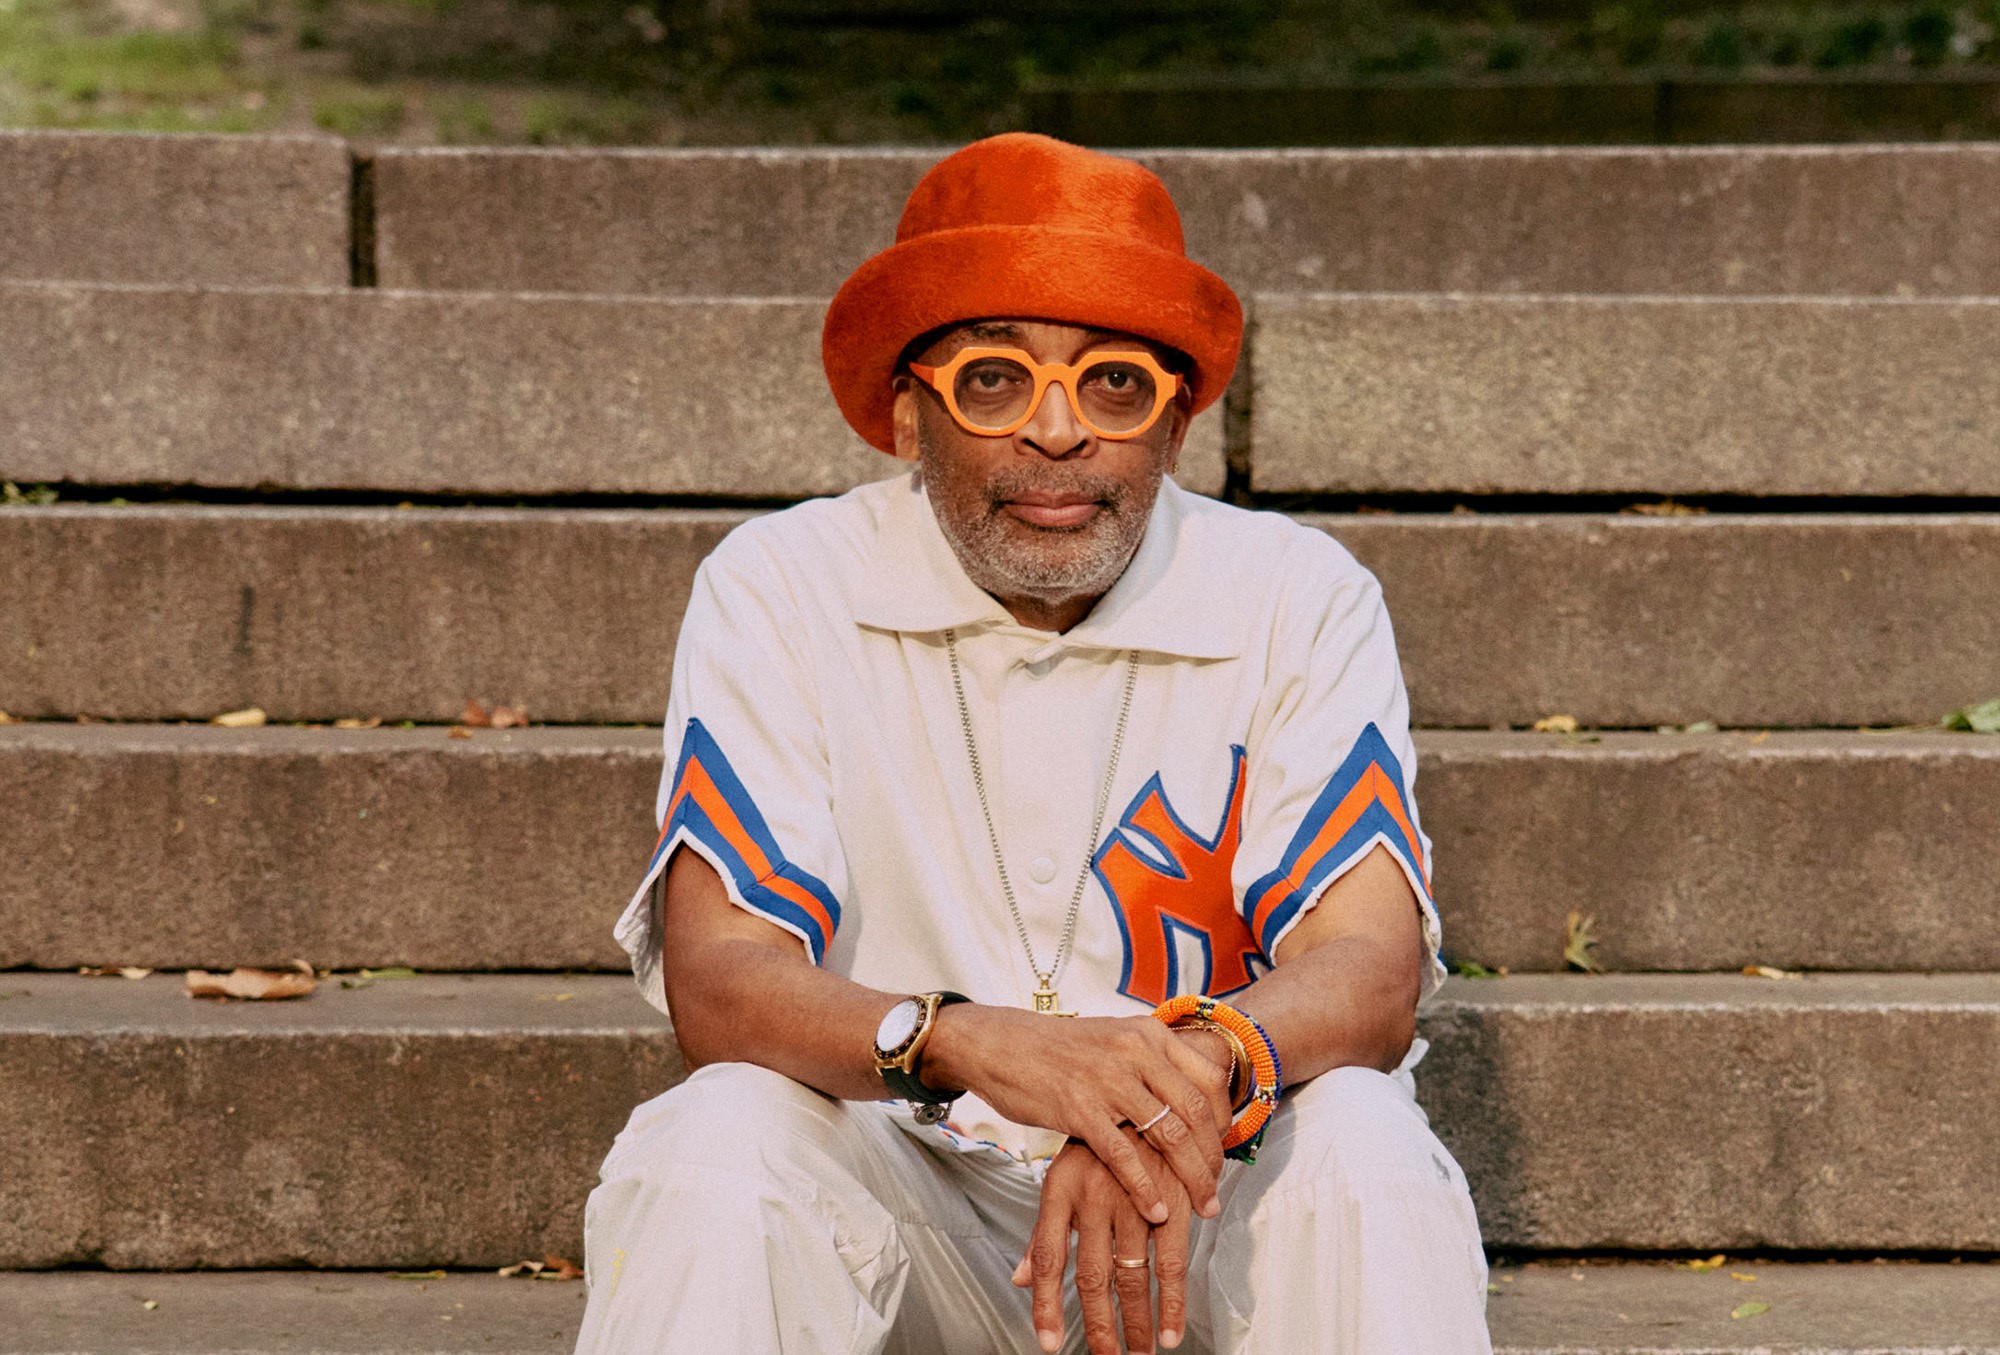 Spike Lee: Creative Sources Brooklyn Museum Preview